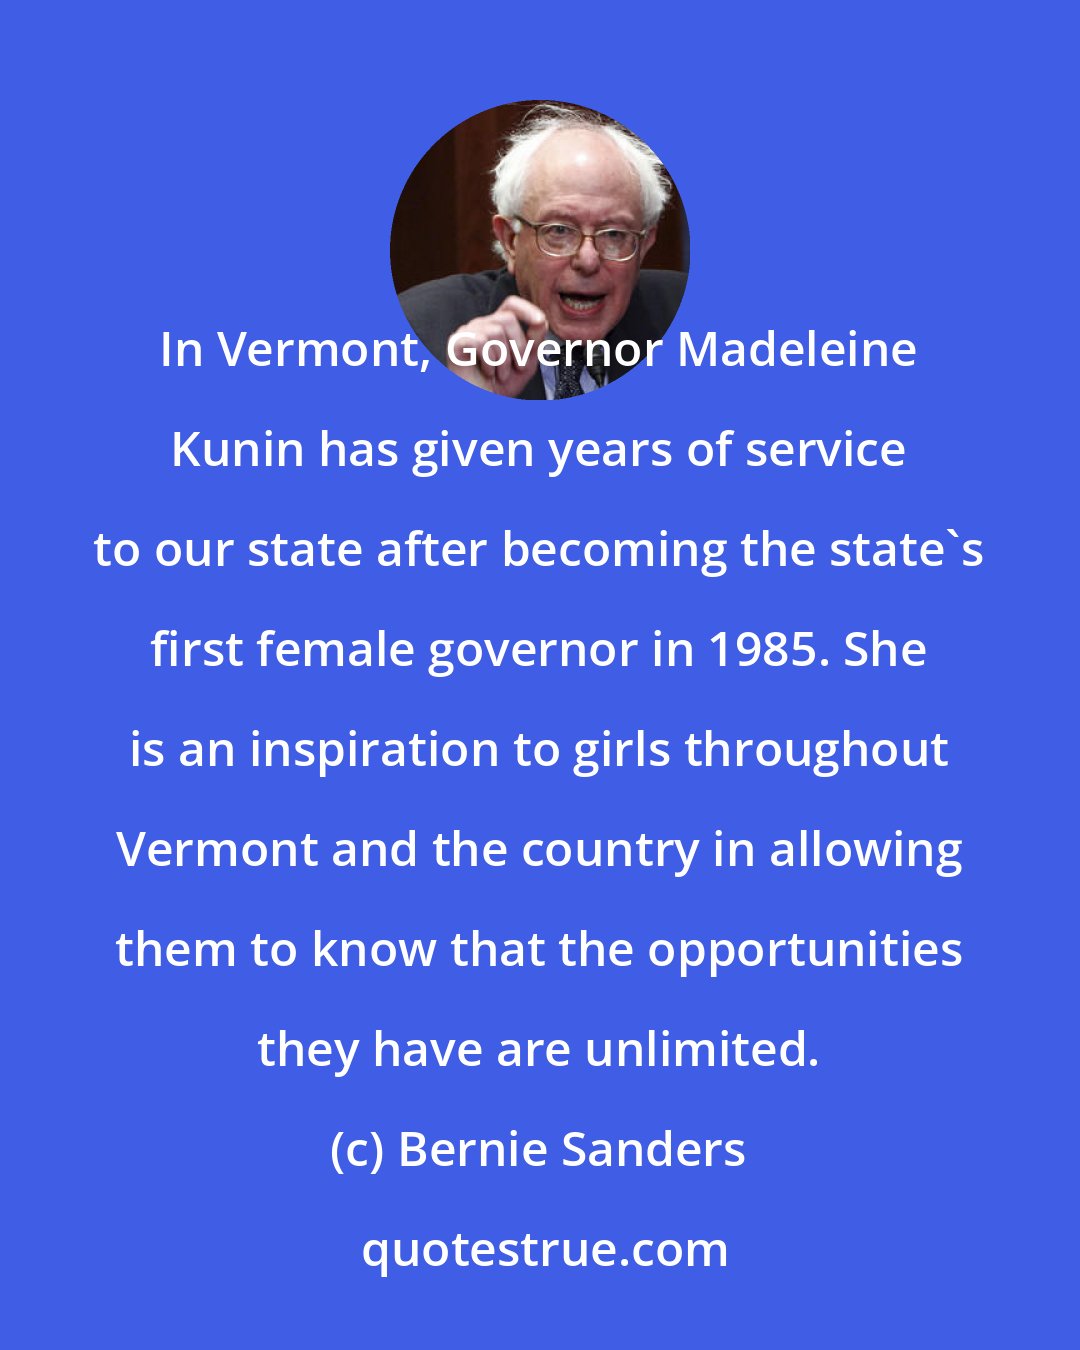 Bernie Sanders: In Vermont, Governor Madeleine Kunin has given years of service to our state after becoming the state's first female governor in 1985. She is an inspiration to girls throughout Vermont and the country in allowing them to know that the opportunities they have are unlimited.